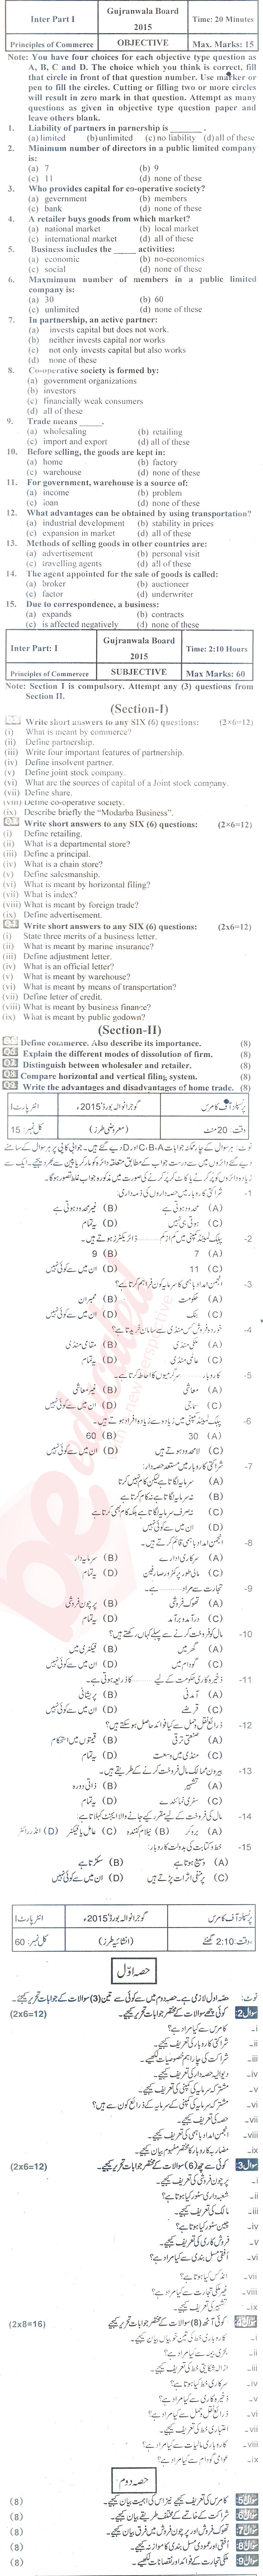 Principles of Commerce ICOM Part 1 Past Paper Group 1 BISE Gujranwala 2015